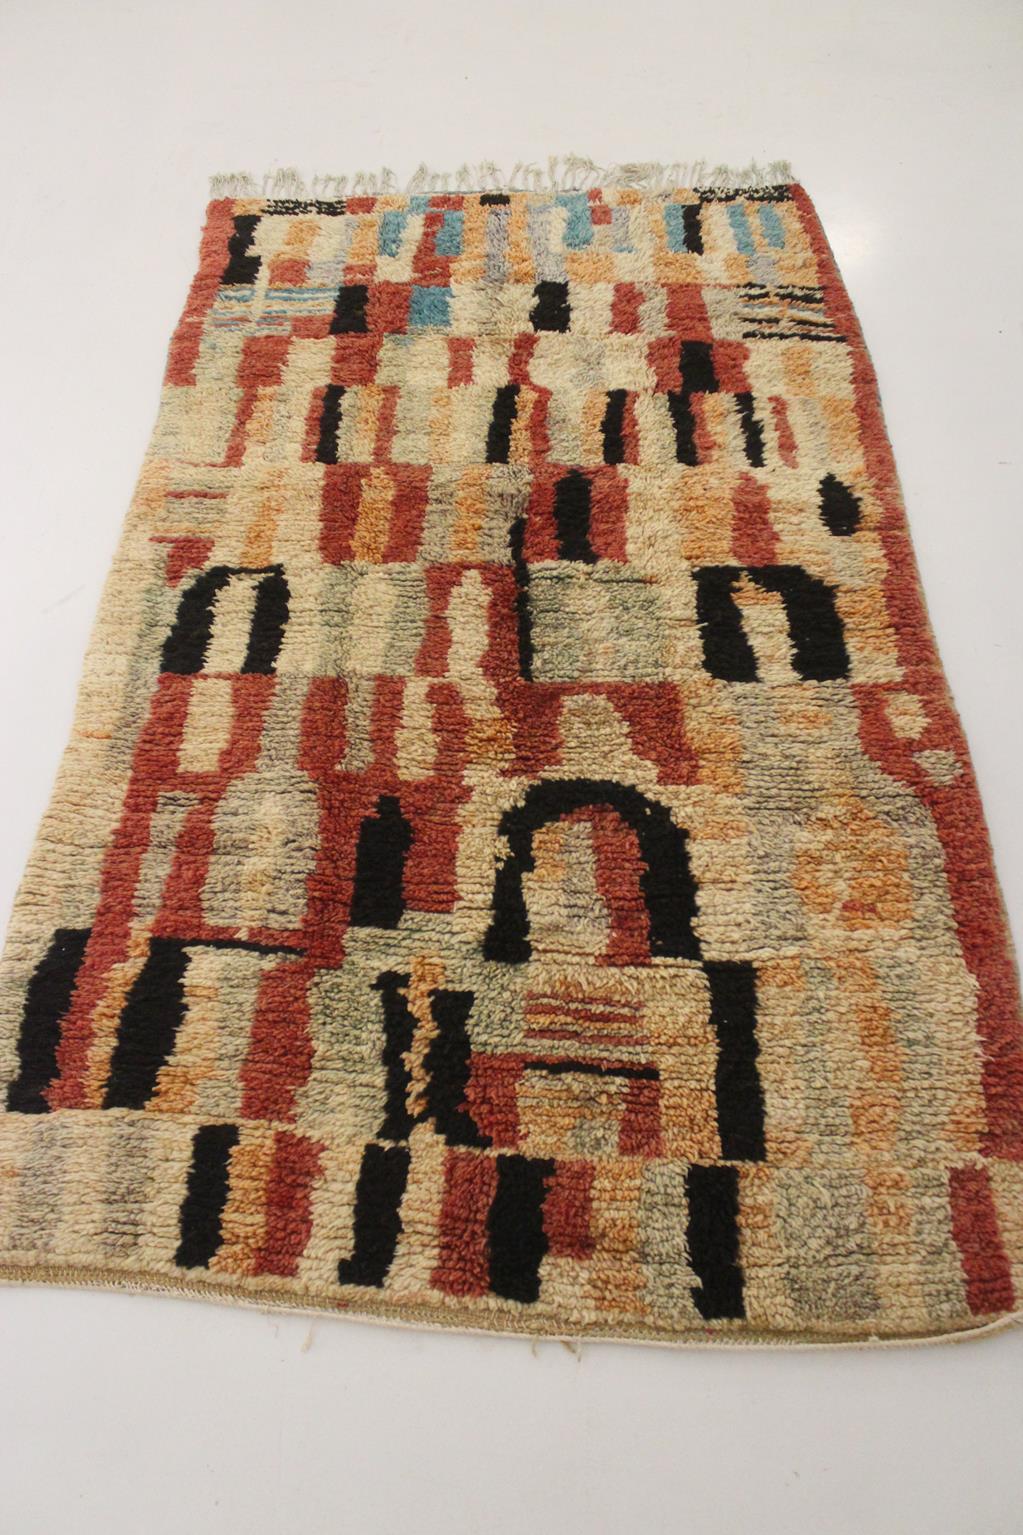 Vintage Moroccan Boujad rug - Terracotta/black - 5x8.6feet / 152x263cm In Good Condition For Sale In Marrakech, MA